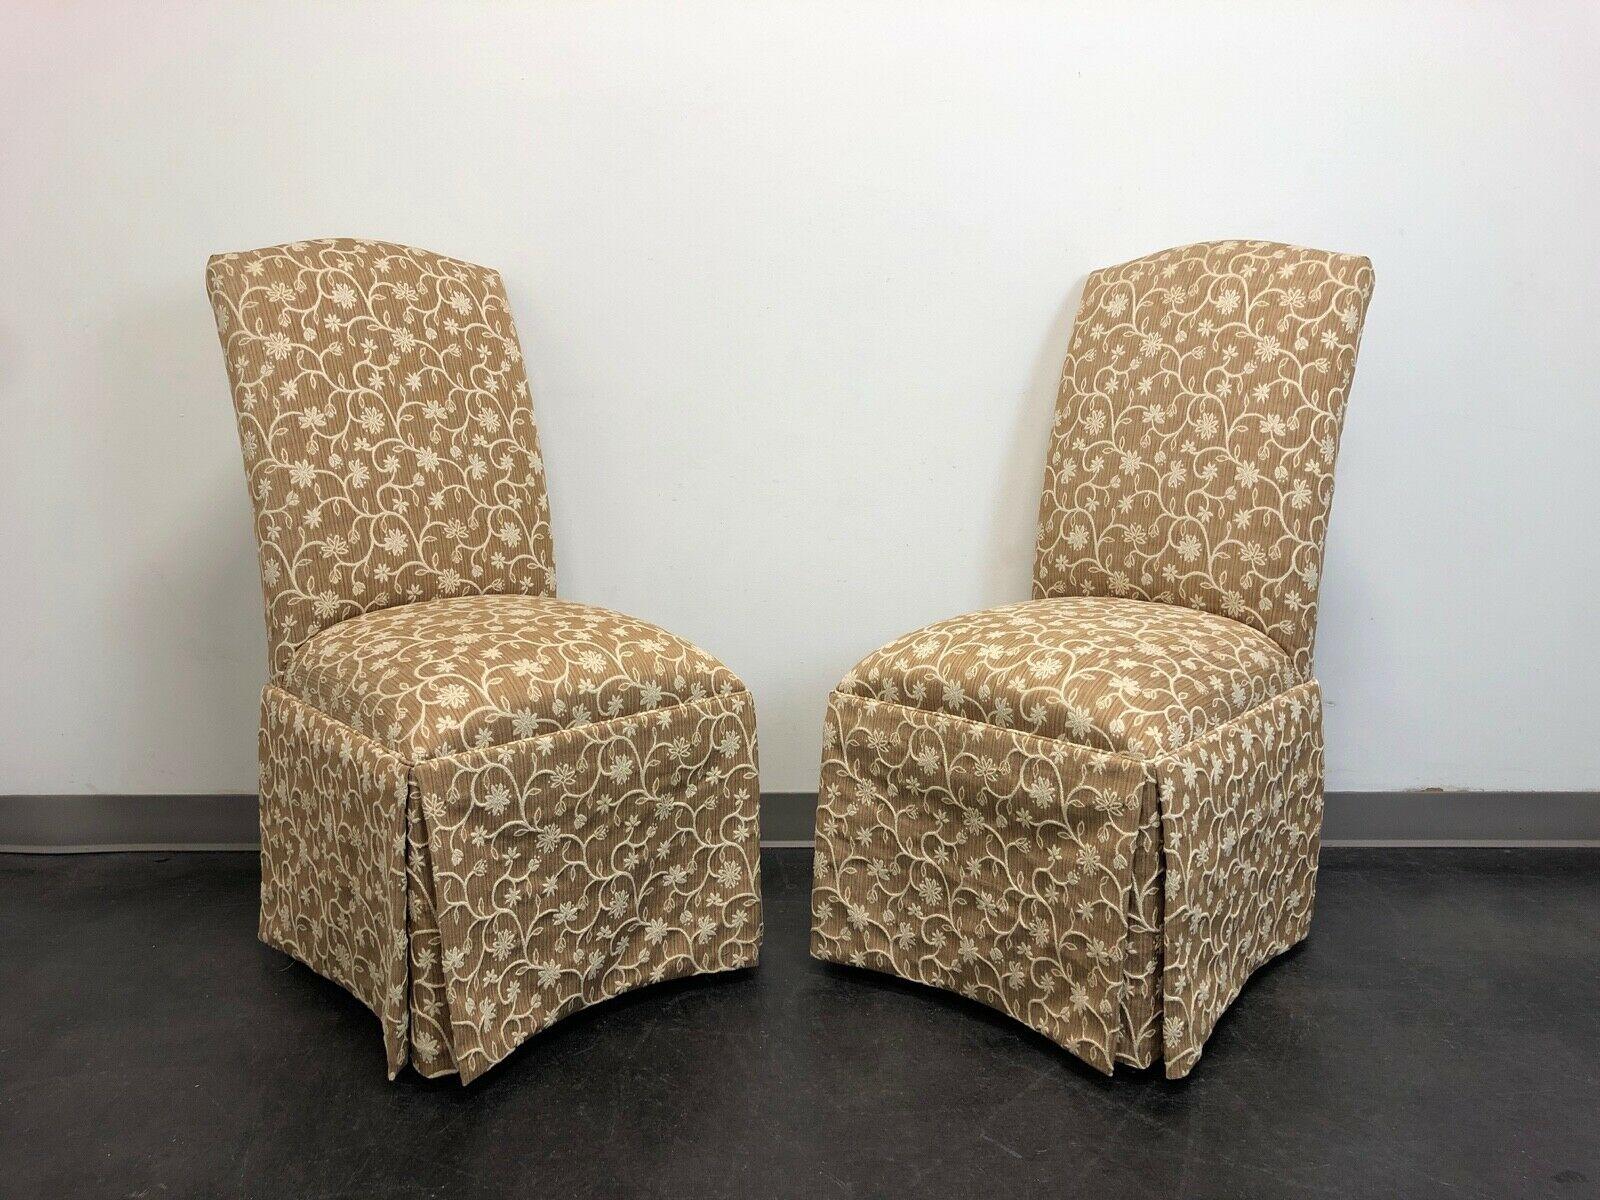 LANE Venture Transitional Style Parsons Chairs - Pair A 3